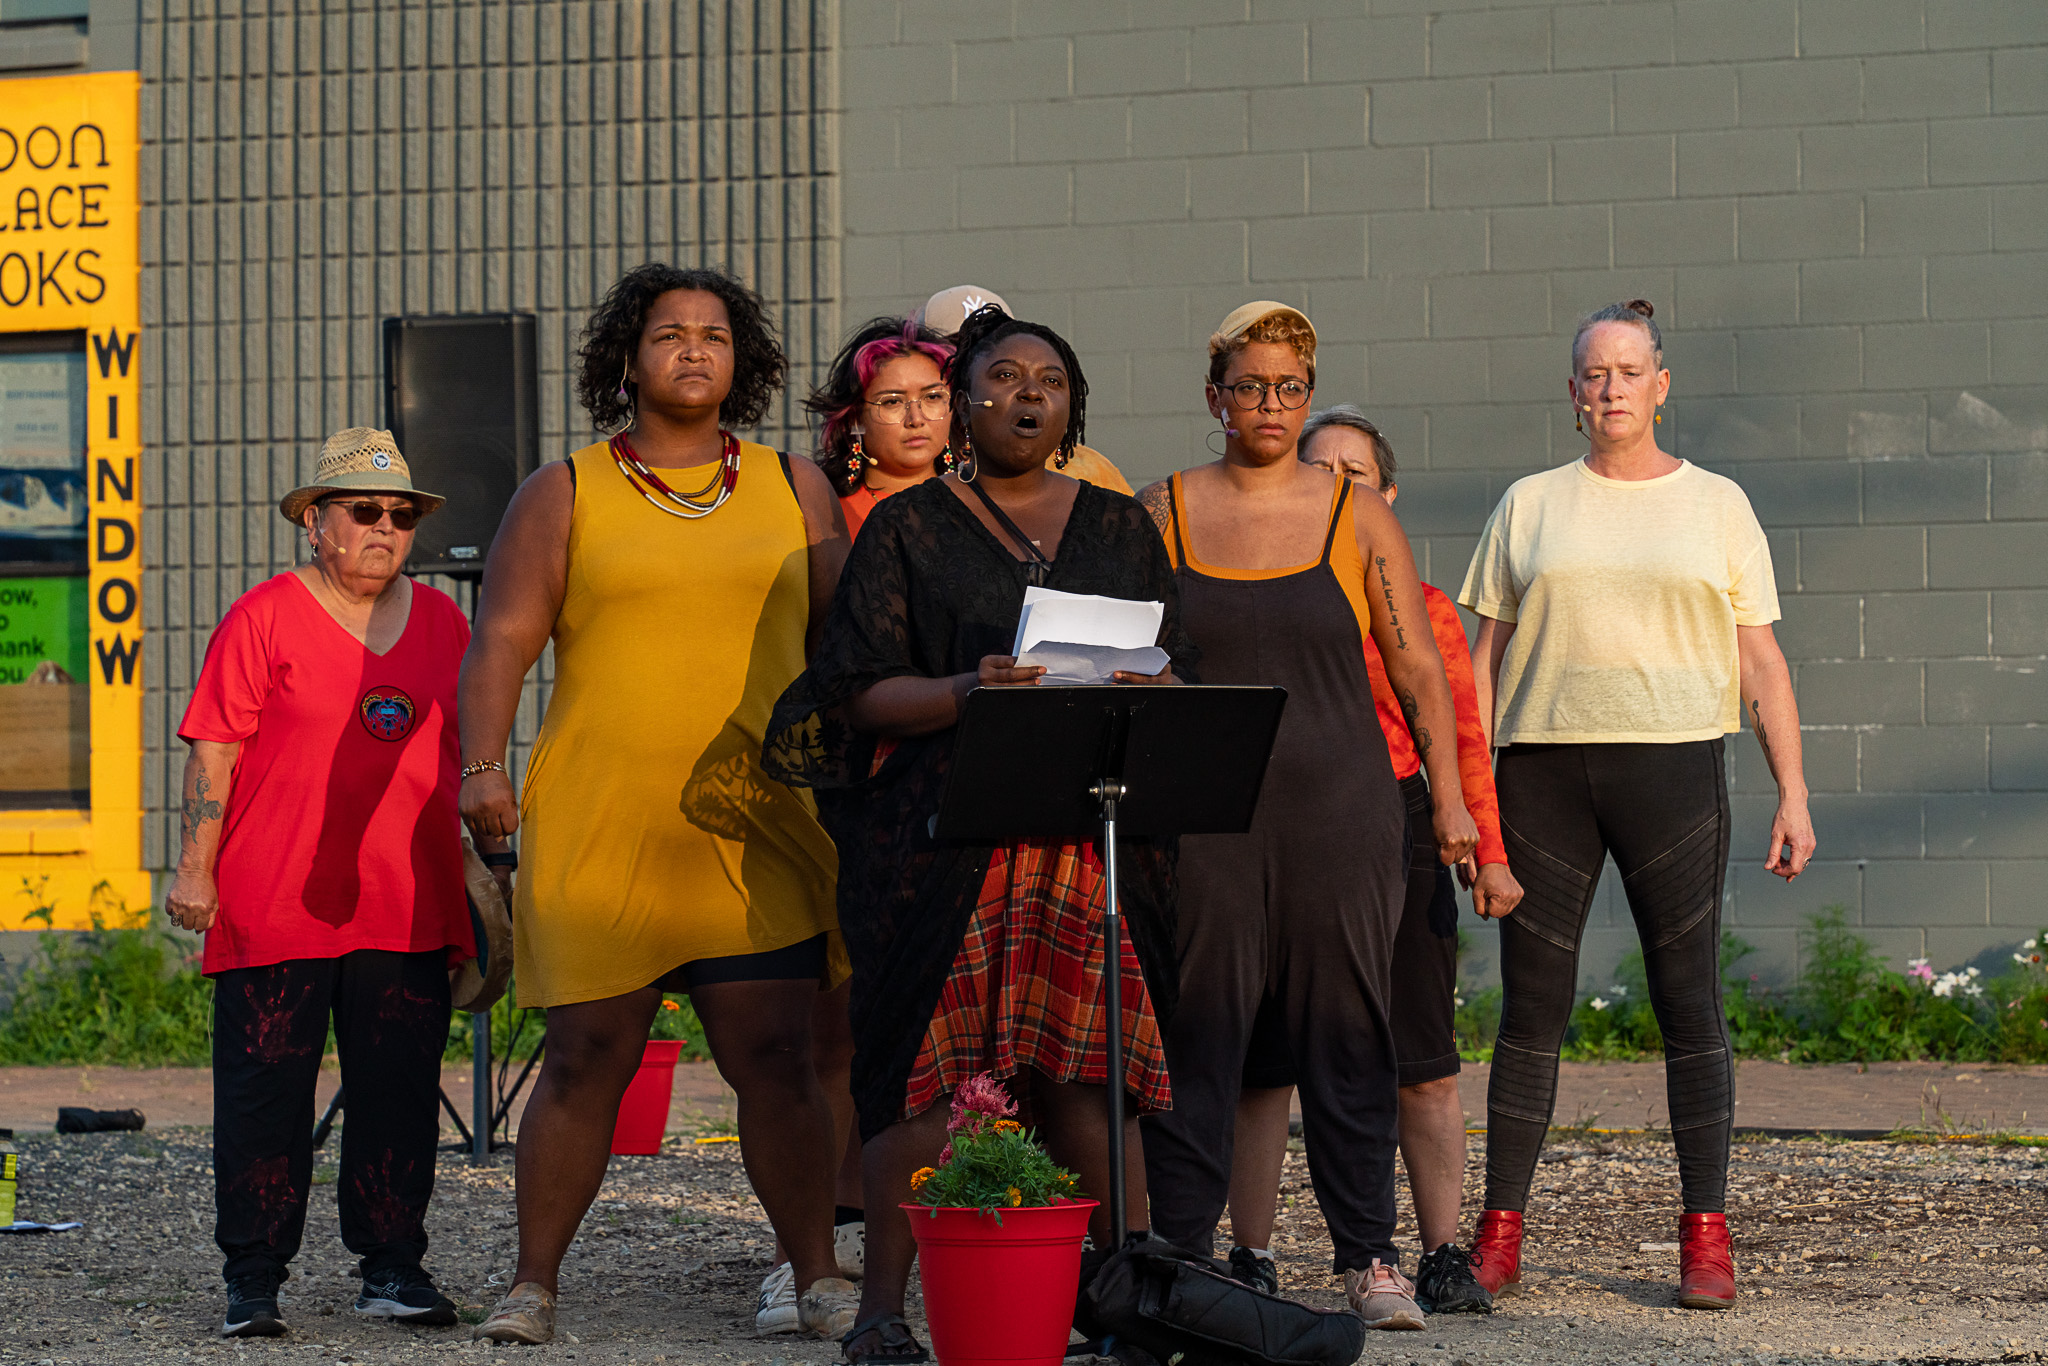 A group of ensemble members from Pangea World Theater’s “Life Born of Fire” performs in front of Moon Palace Books in Minneapolis. They look forward and pose in determined stances.